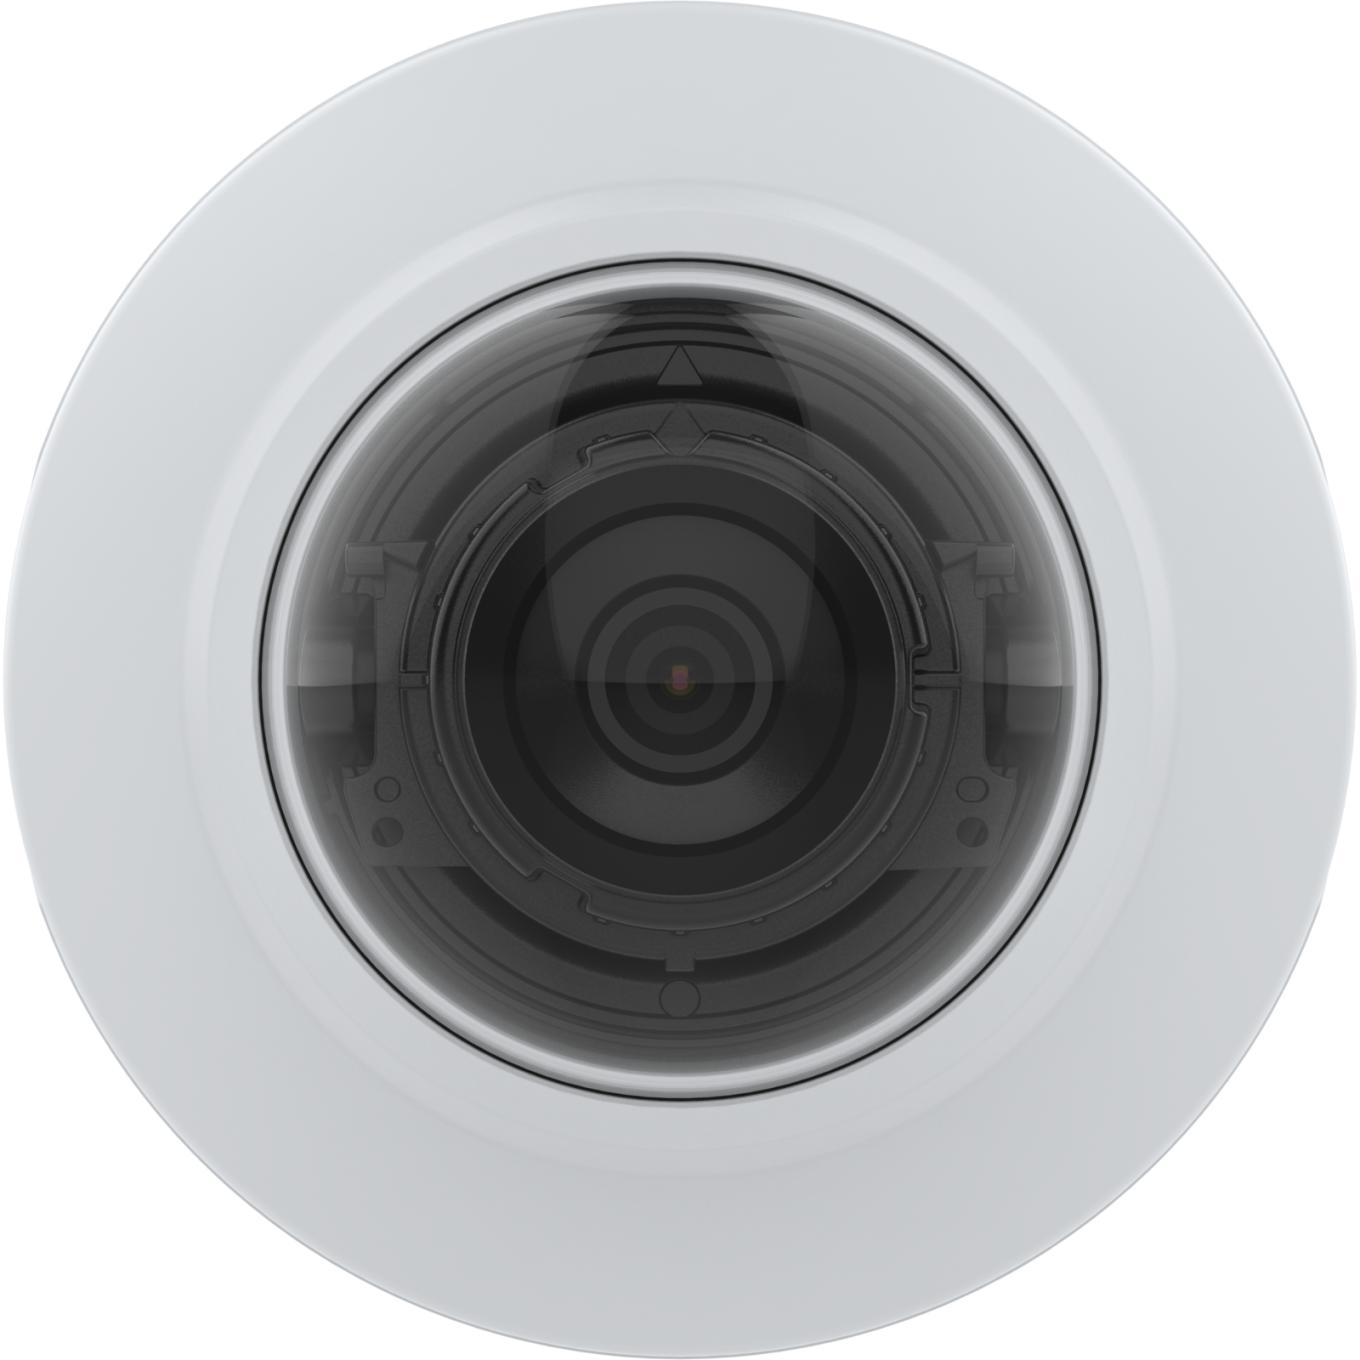 AXIS M4215-LV Dome Camera、壁面設置、正面から見た図